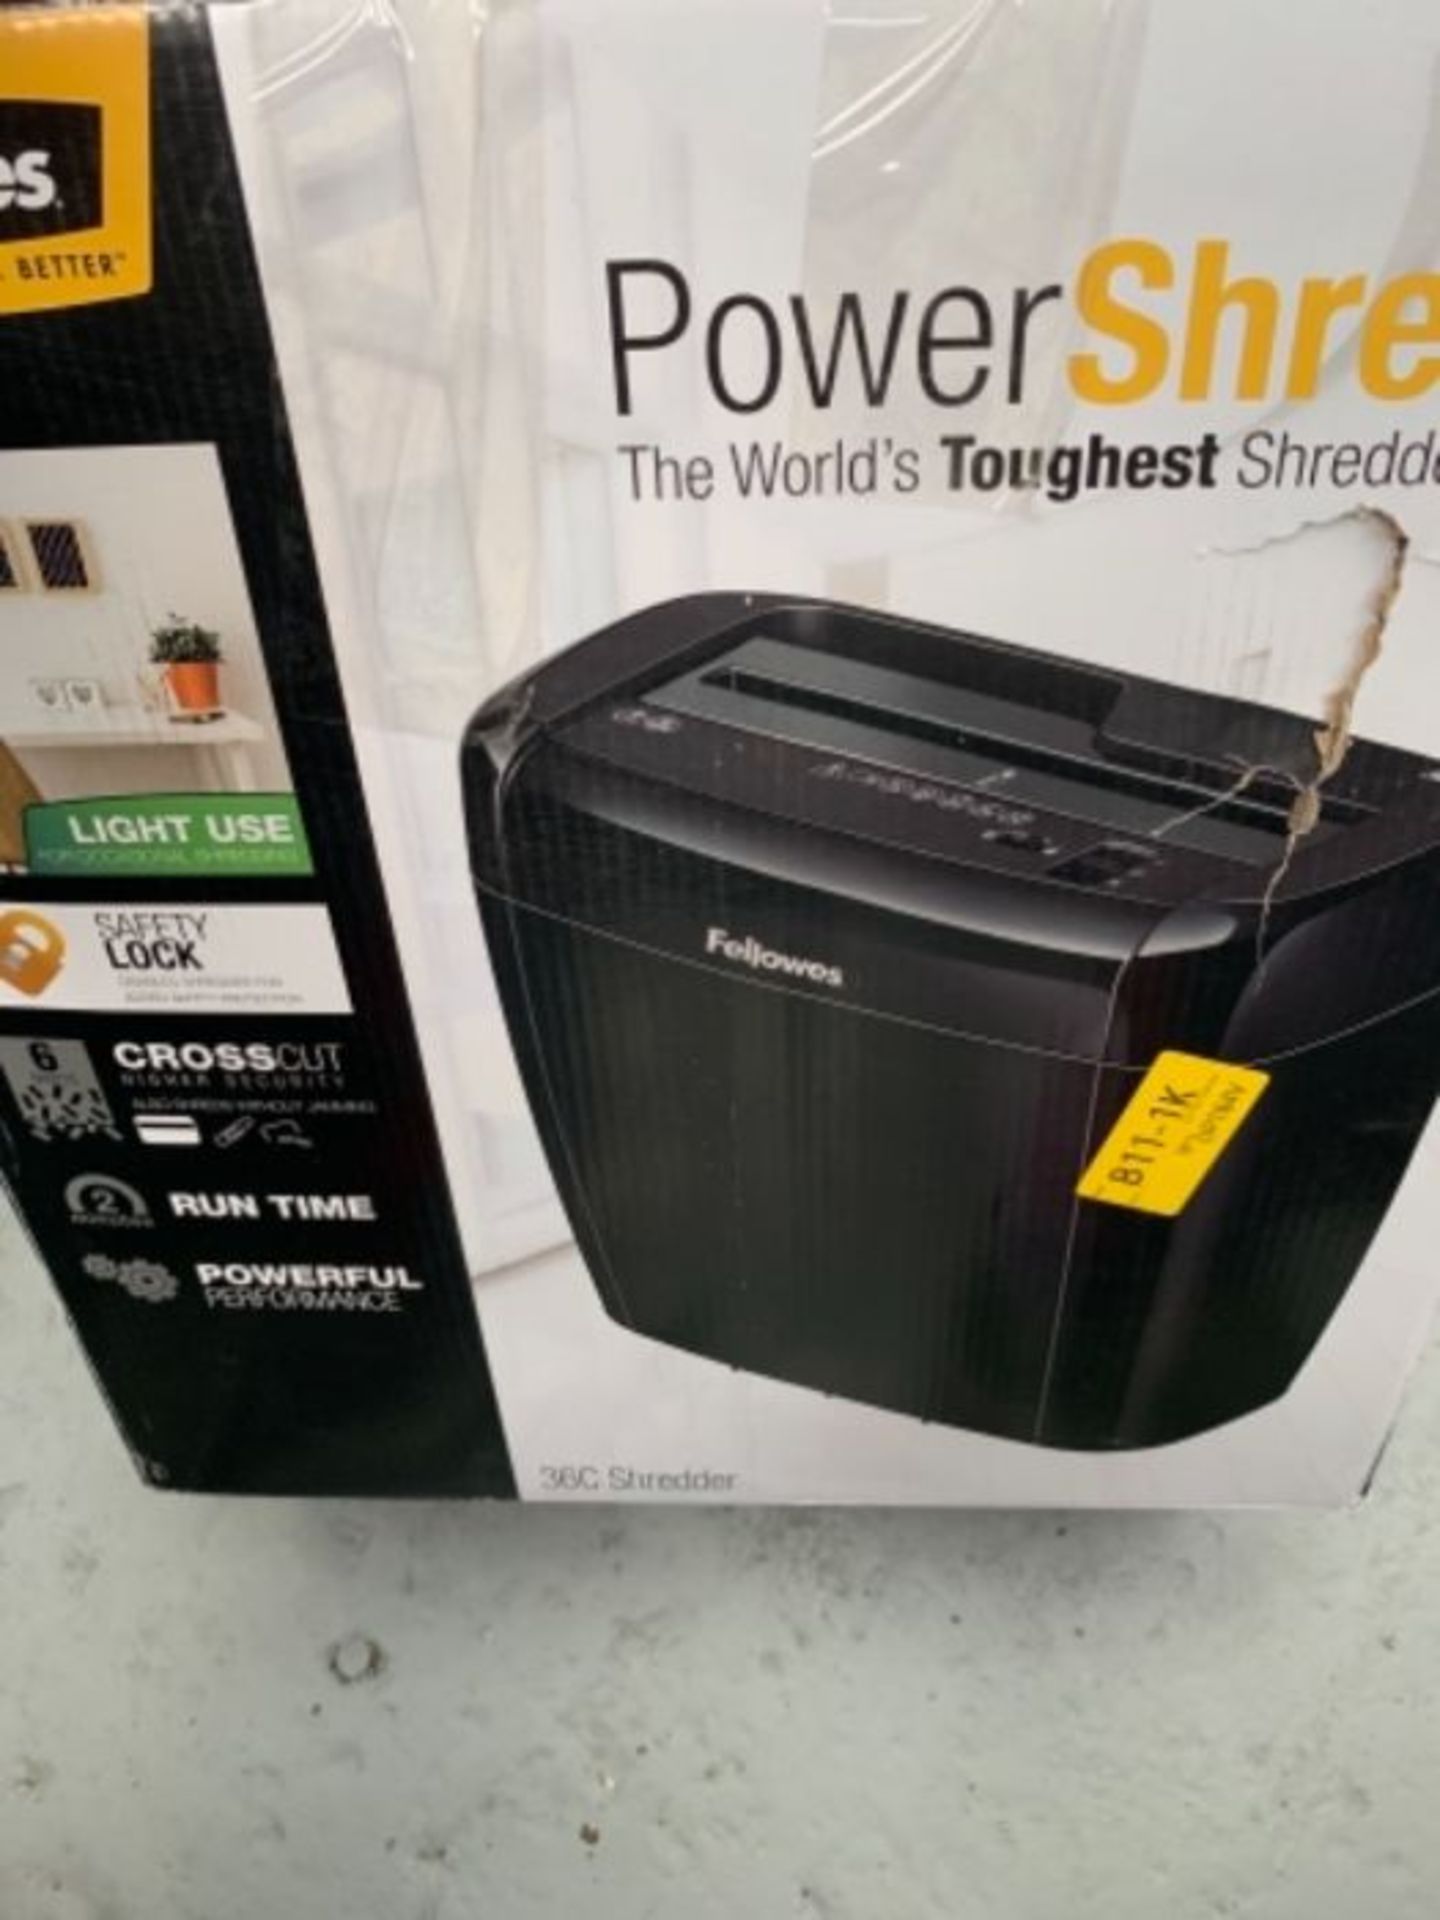 Fellowes Powershred 36C Cross Cut Personal Paper Shredder with Safety Lock for Home Us - Image 2 of 2